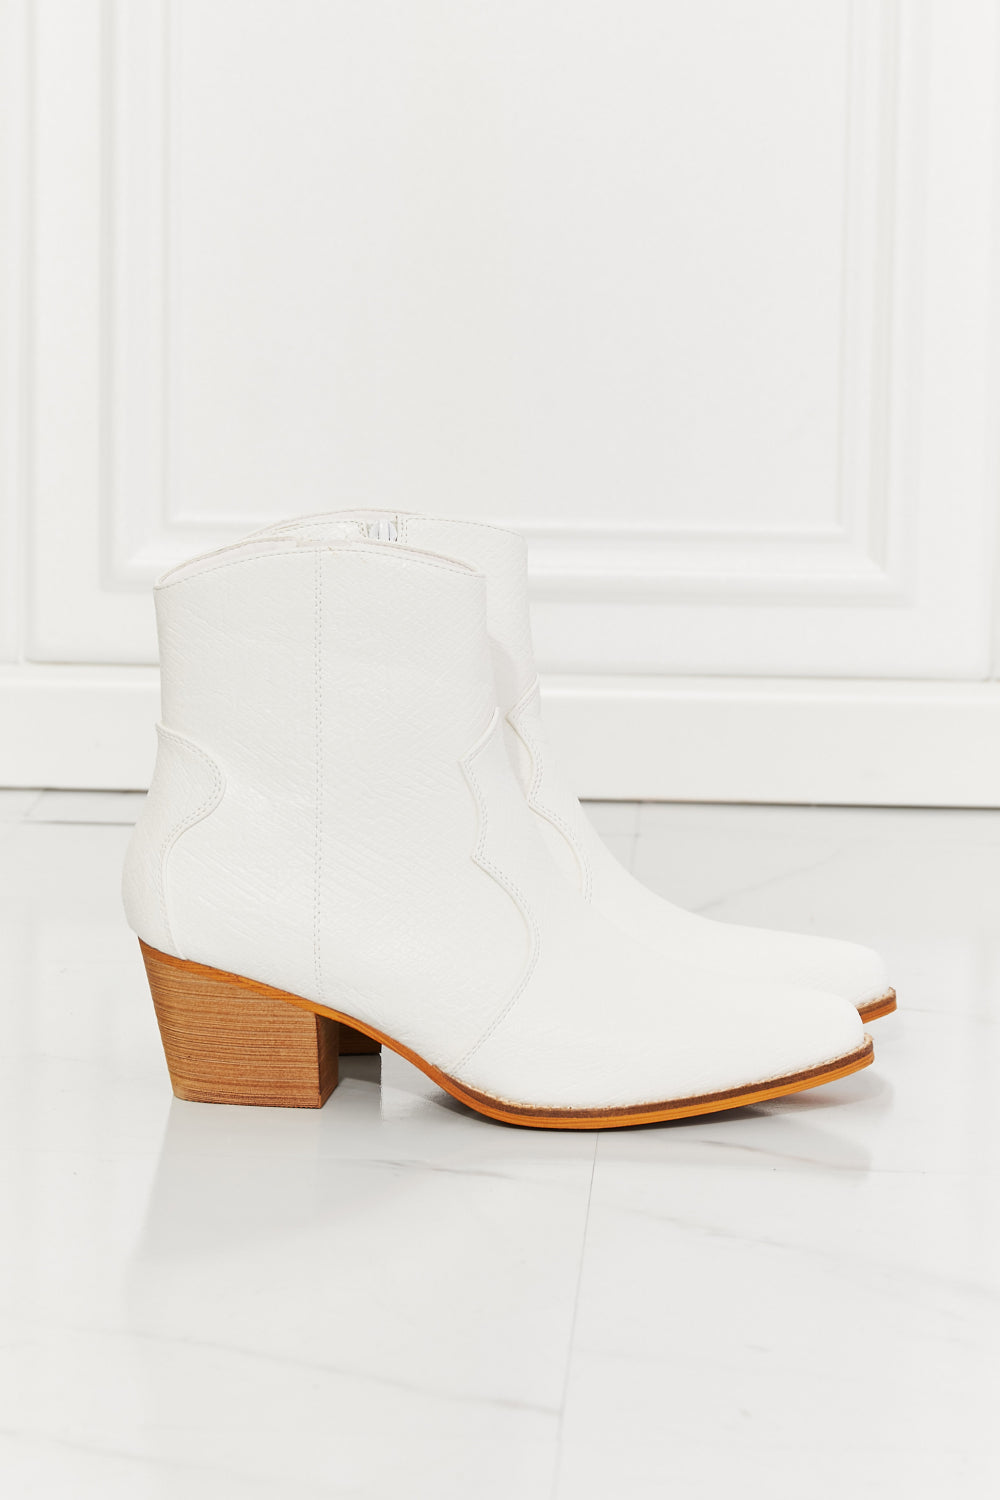 Beige MMShoes Watertower Town Faux Leather Western Ankle Boots in White Sentient Beauty Fashions shoes